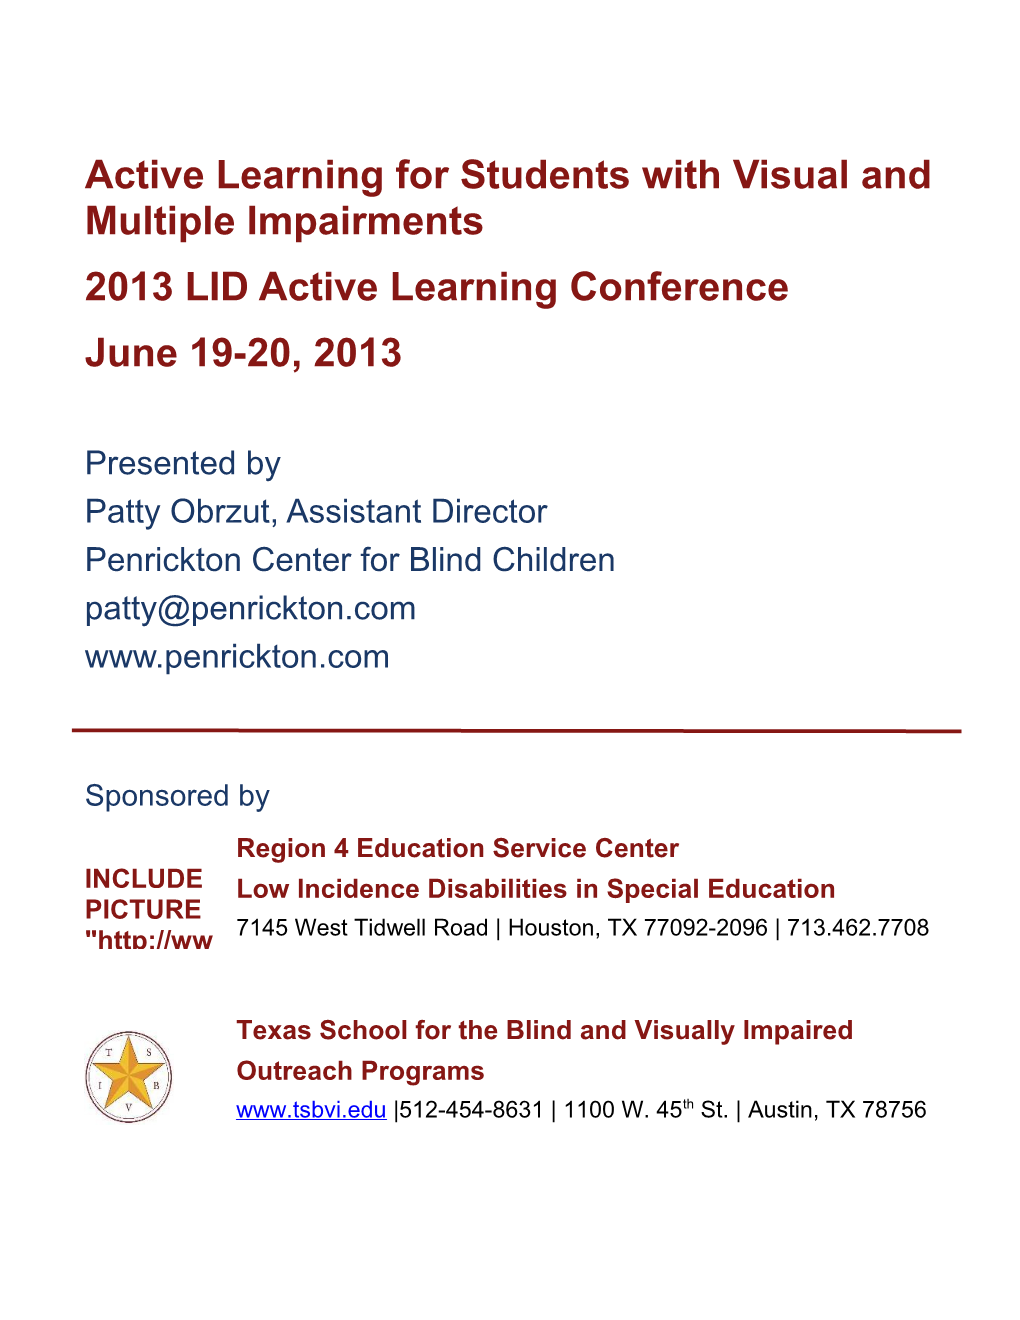 Active Learning for Students with Visual and Multiple Impairments